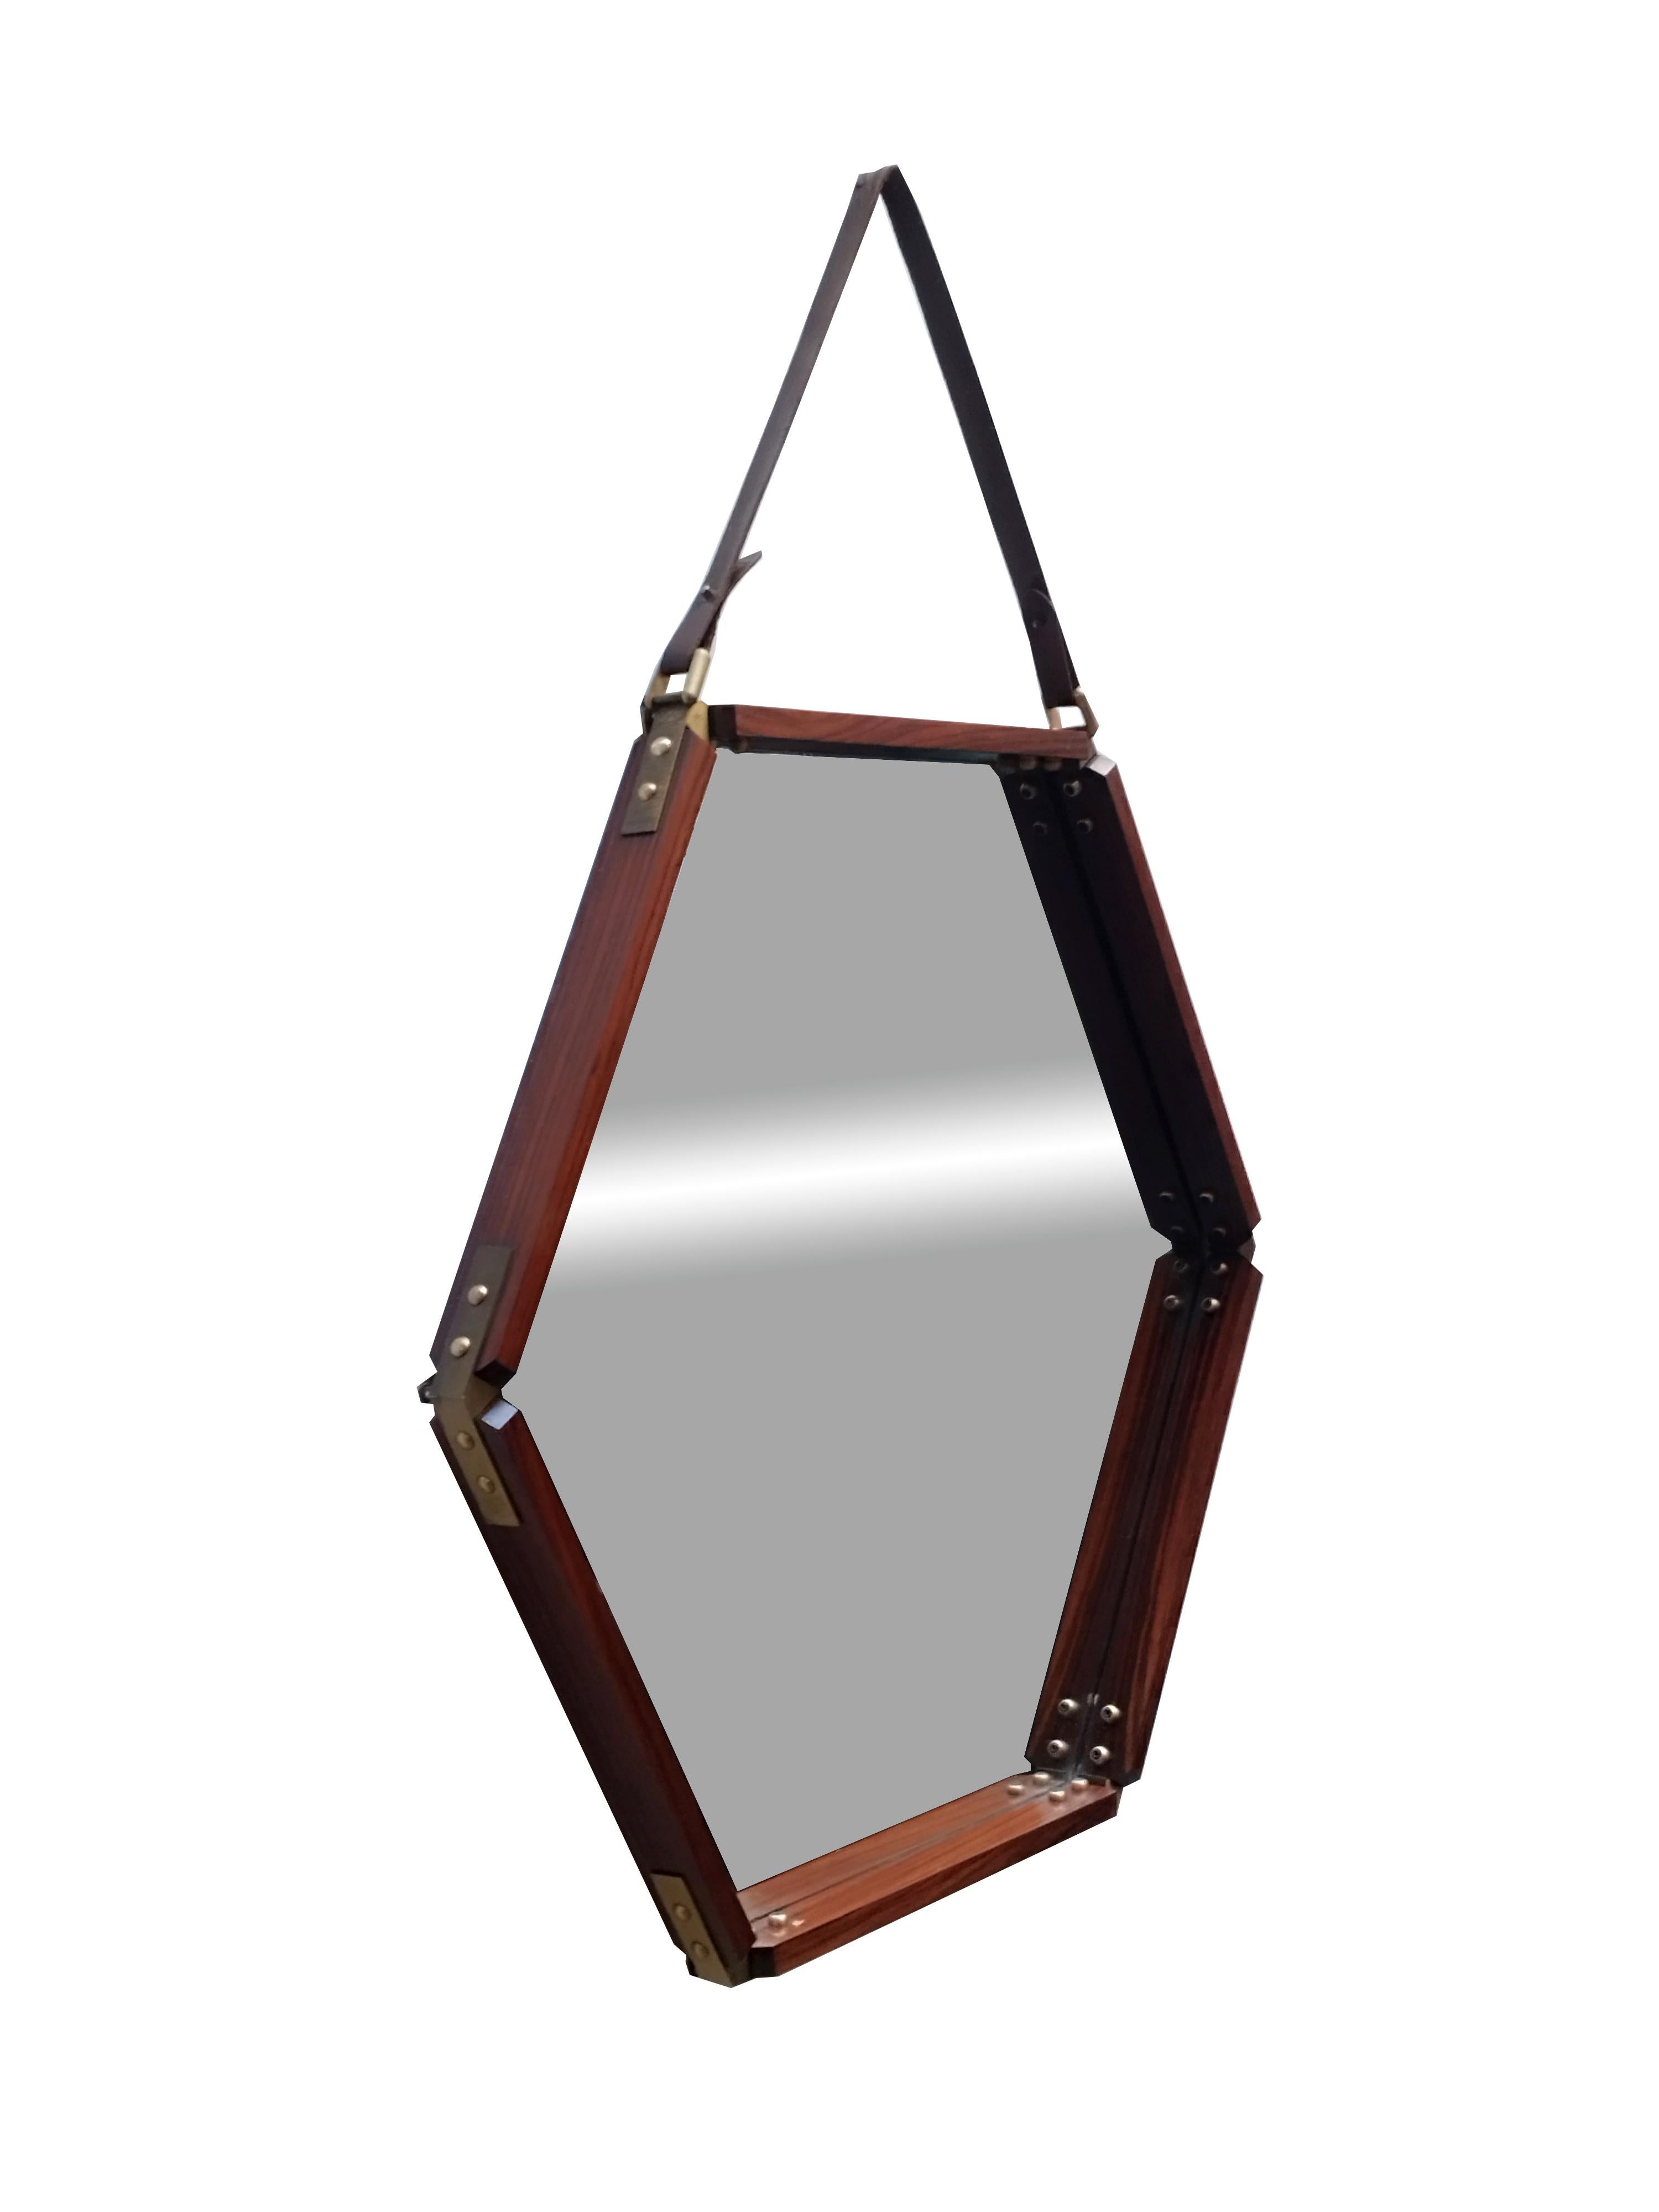 Hexagonal mirror with teak frame, brass inserts and original leather strap, mirror is in perfect condition, patina. Italian manufacture 1960